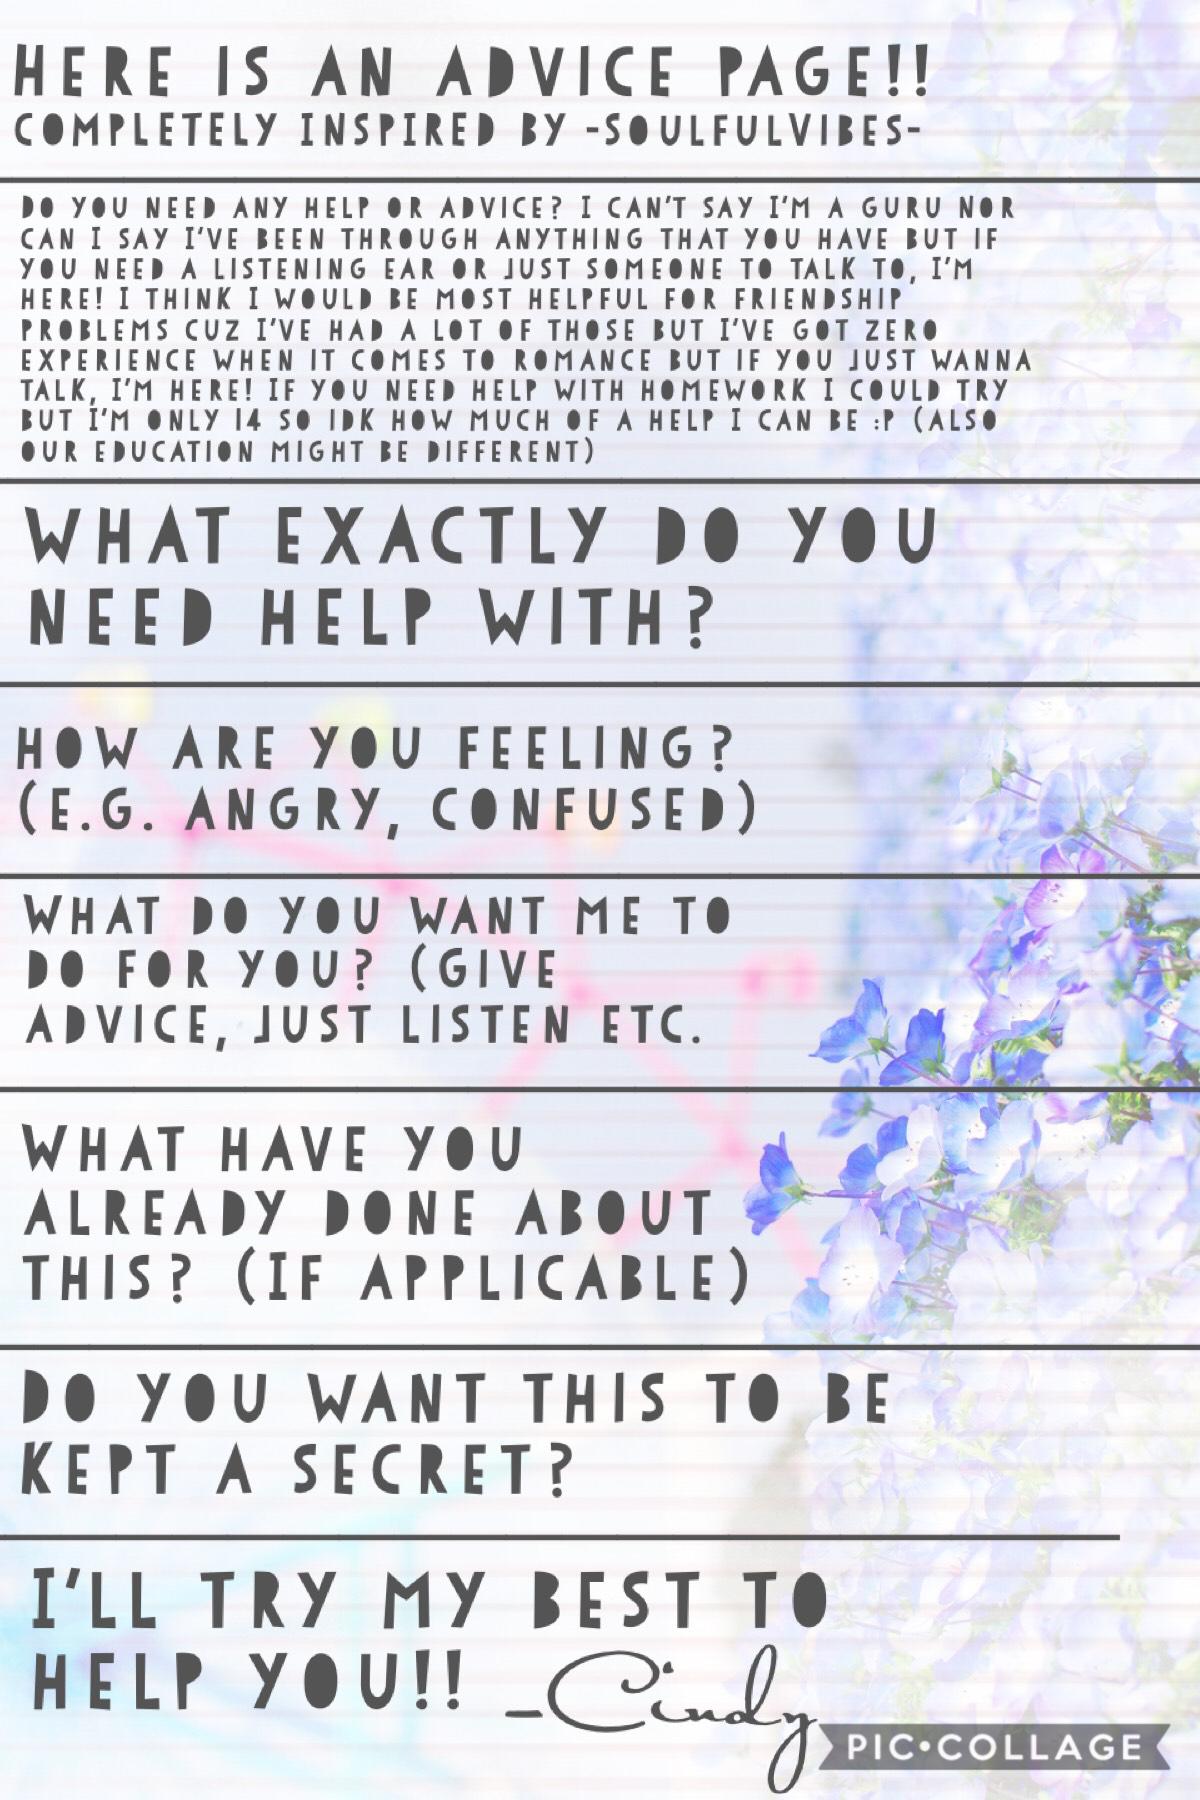 ALL CREDITS FOR THIS IDEA GOES TO -SoulfulVibes-!!!! I don’t think I will be of much help but just in case I can be, I’m here :) also I’m not very good at algebra  (I can do basic stuff though ofc) so uh yeah :)))  

hope you have a great day and don’t fo